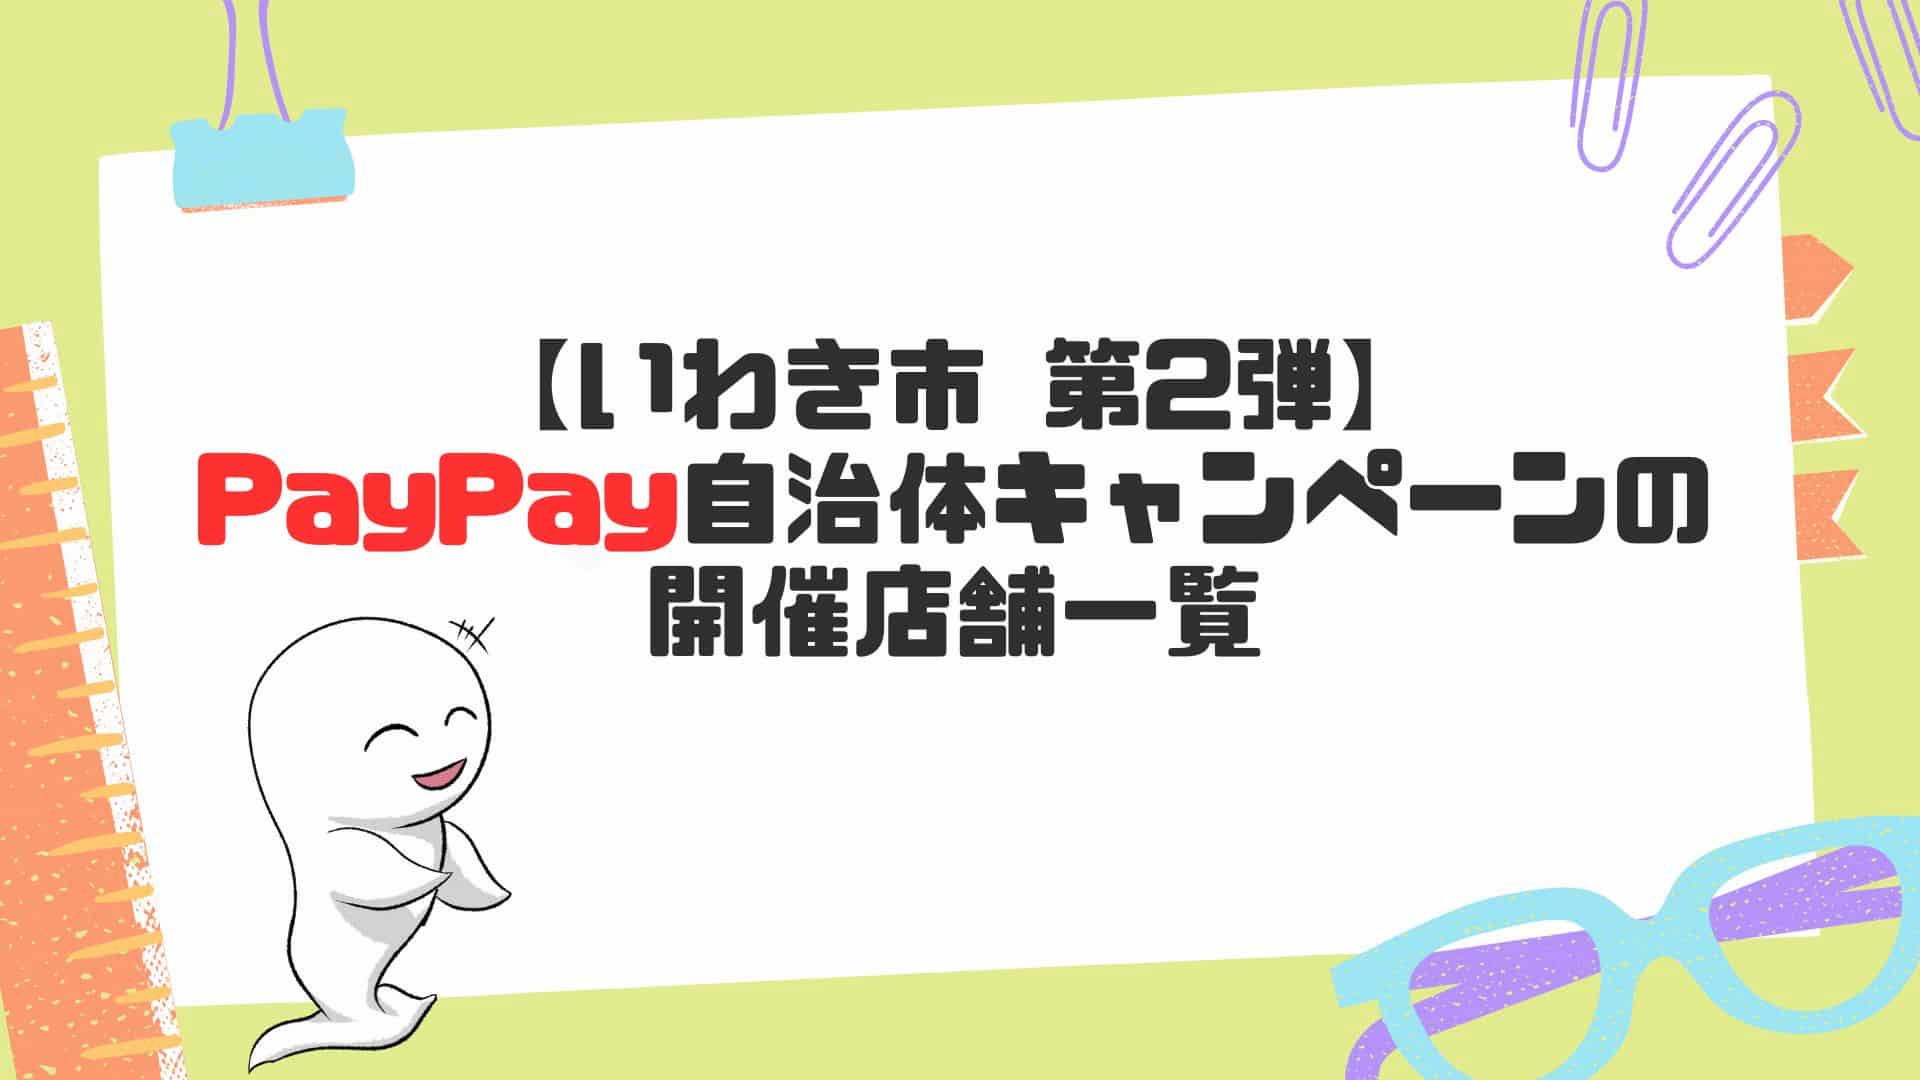 paypay_いわき市第2弾